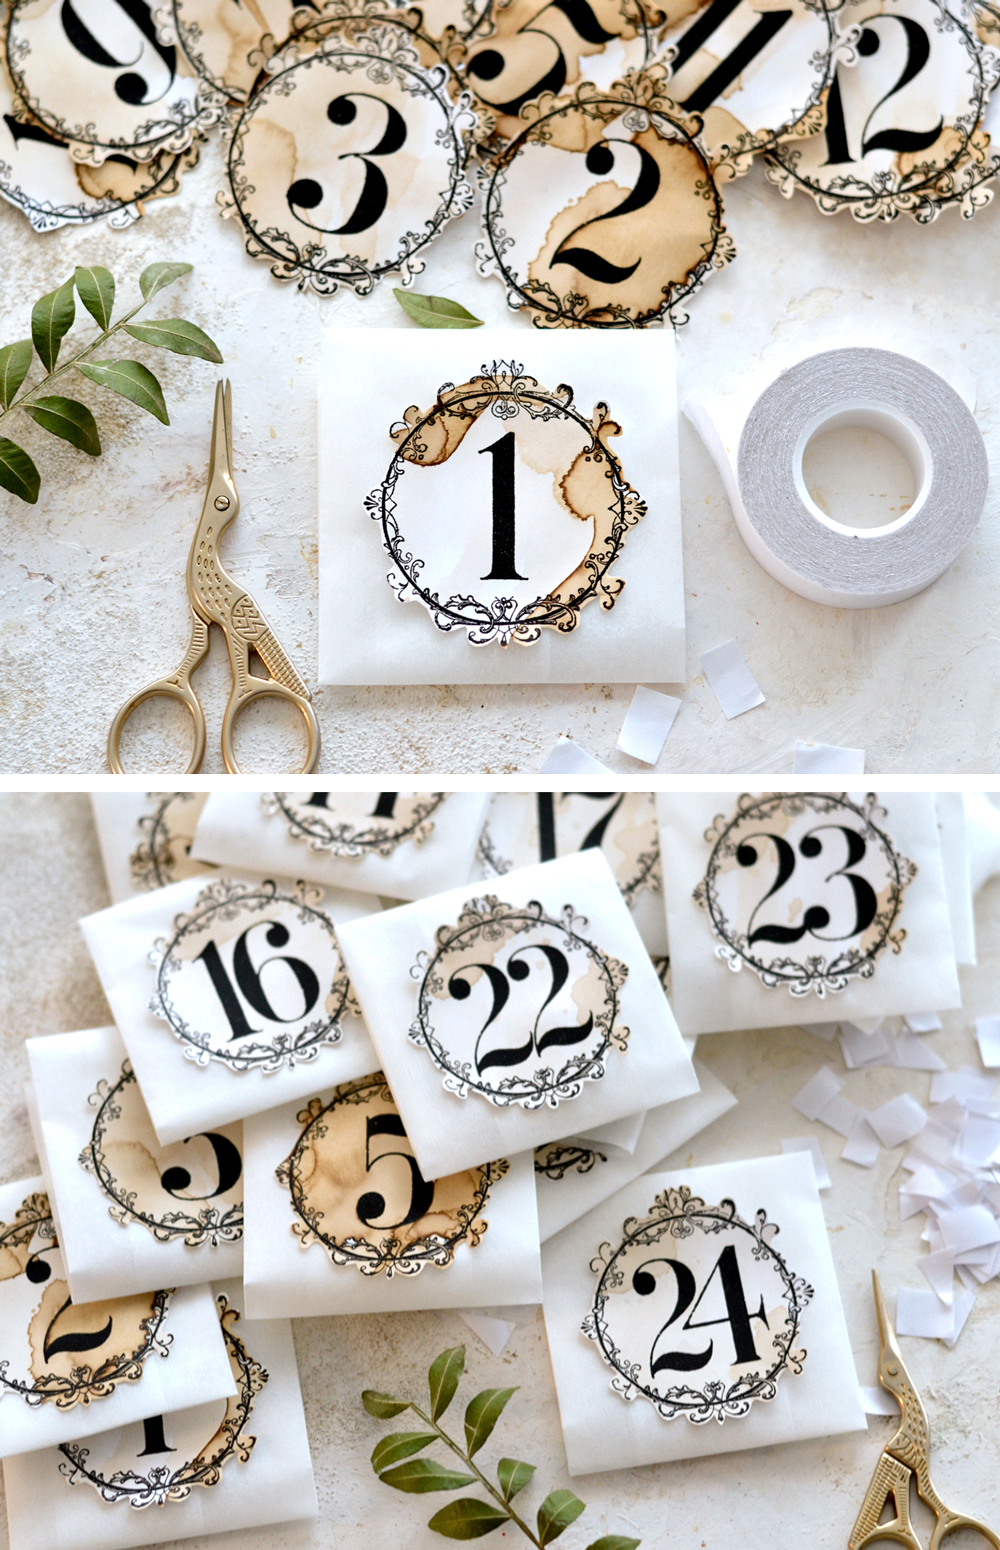 How to attach the vintage labels to the parchment paper envelopes using double sided tape and a pair of scissors